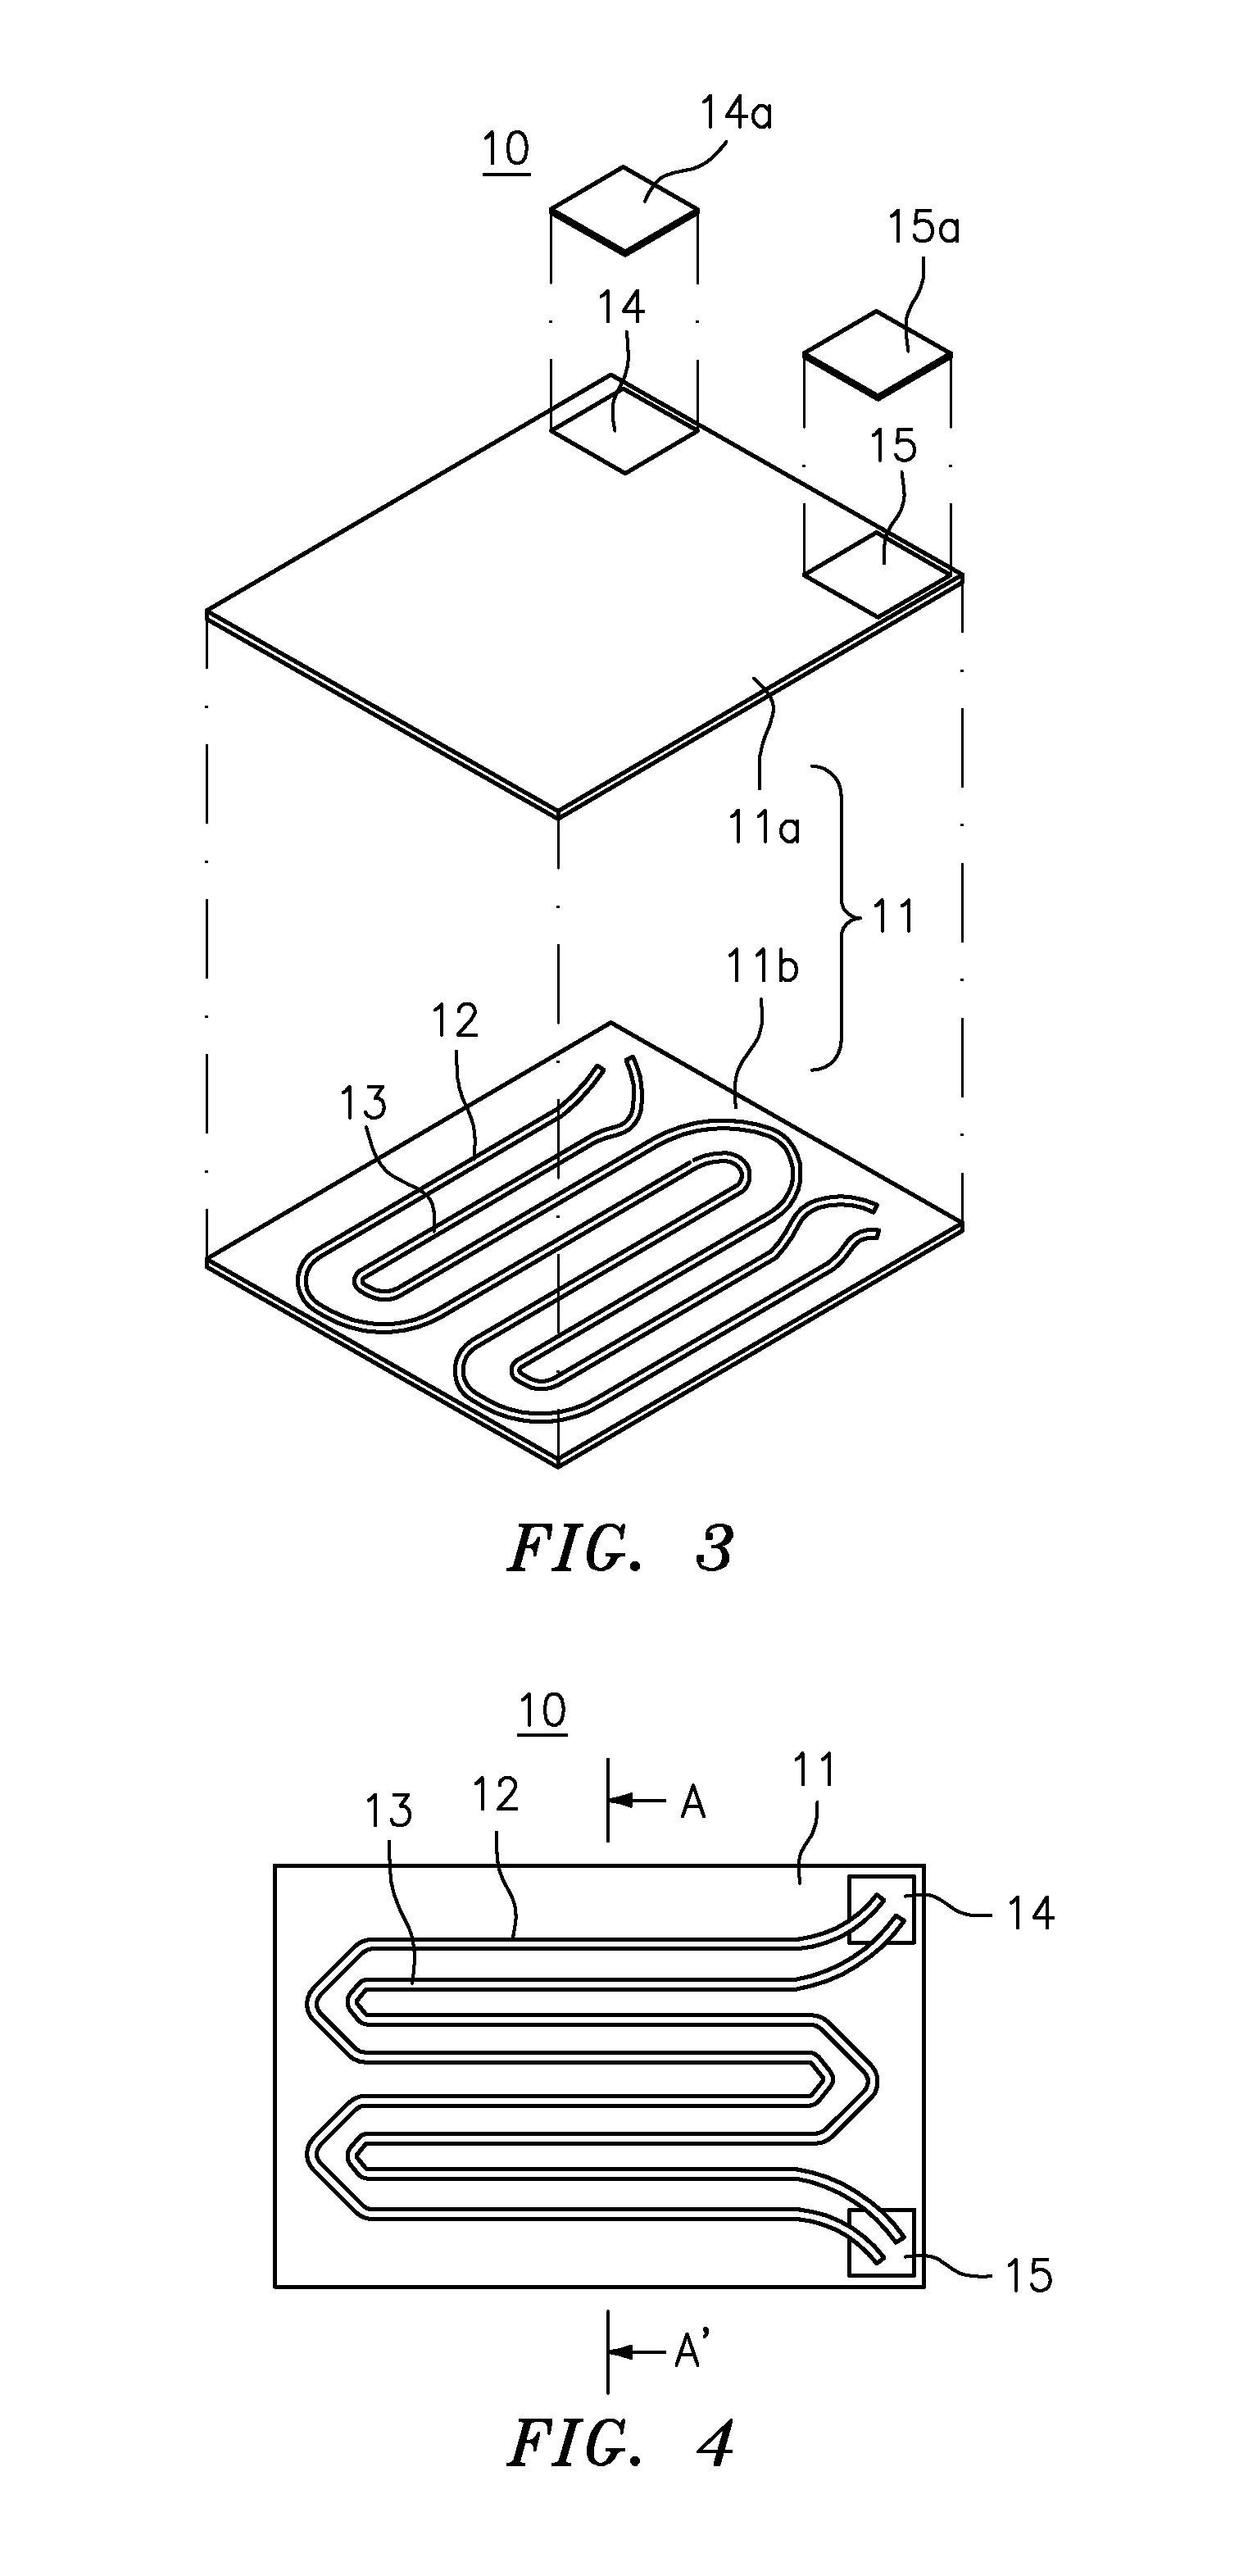 Prefabricated heat-insulation panel with two hot water flow paths